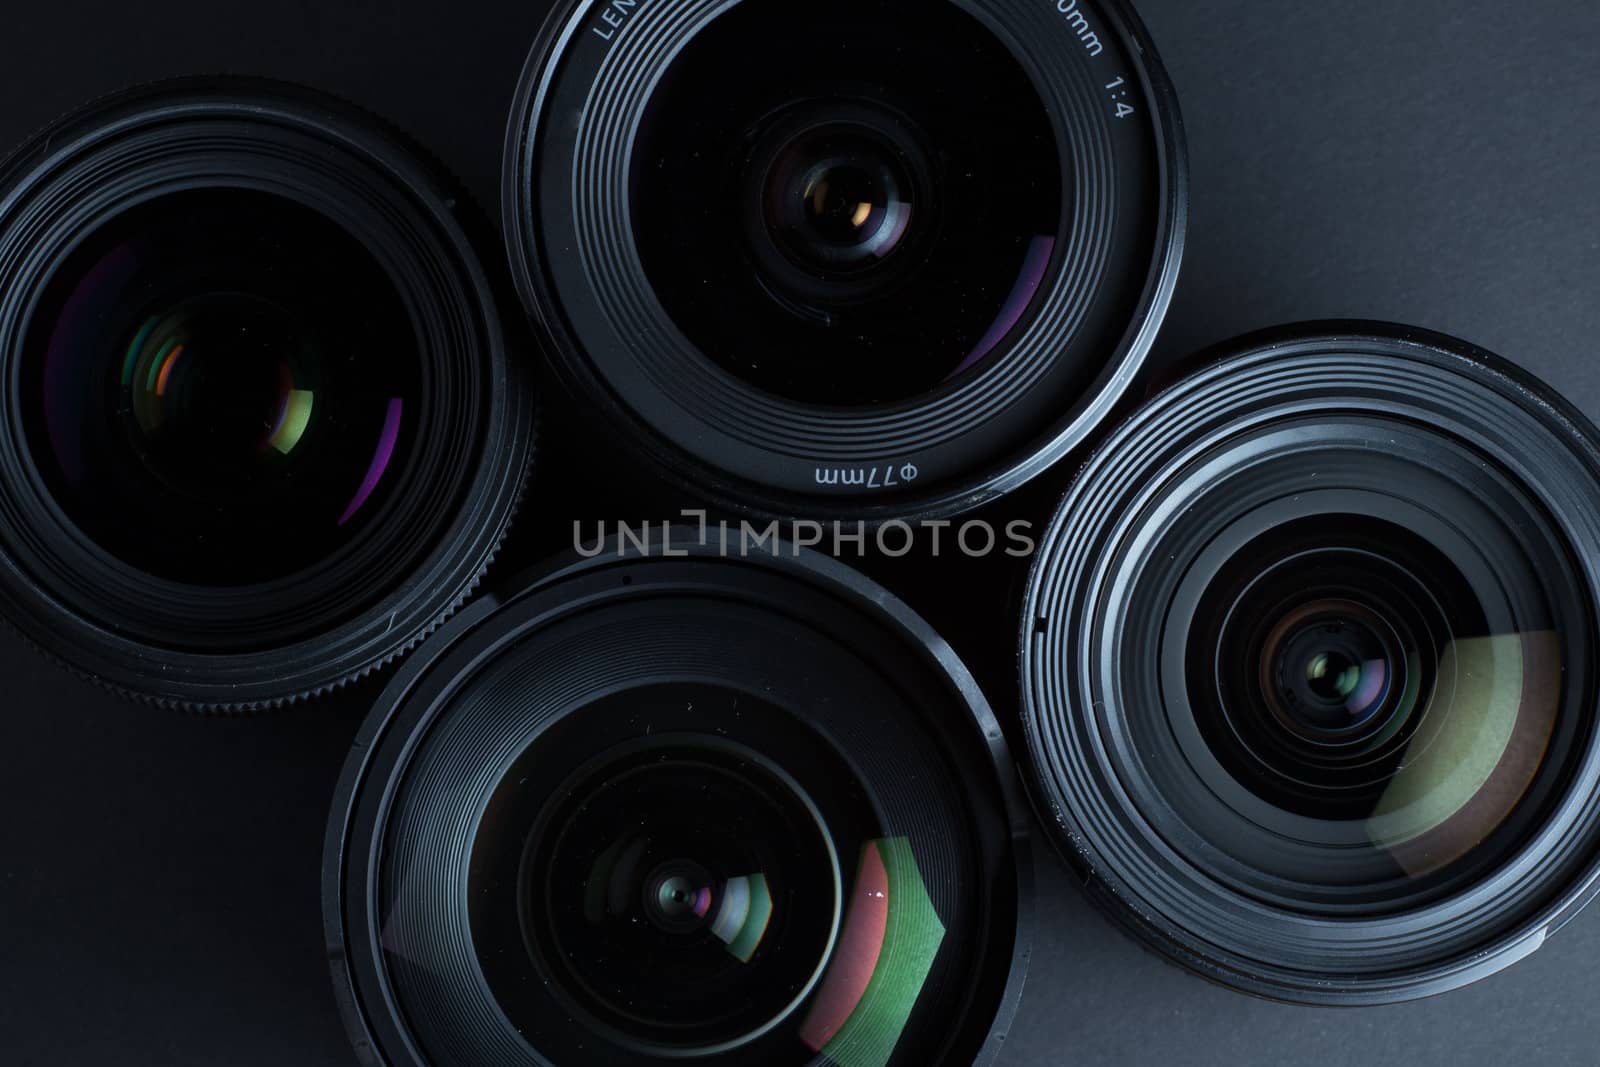 Set of various DSLR lenses with colorful reflections - shot from above